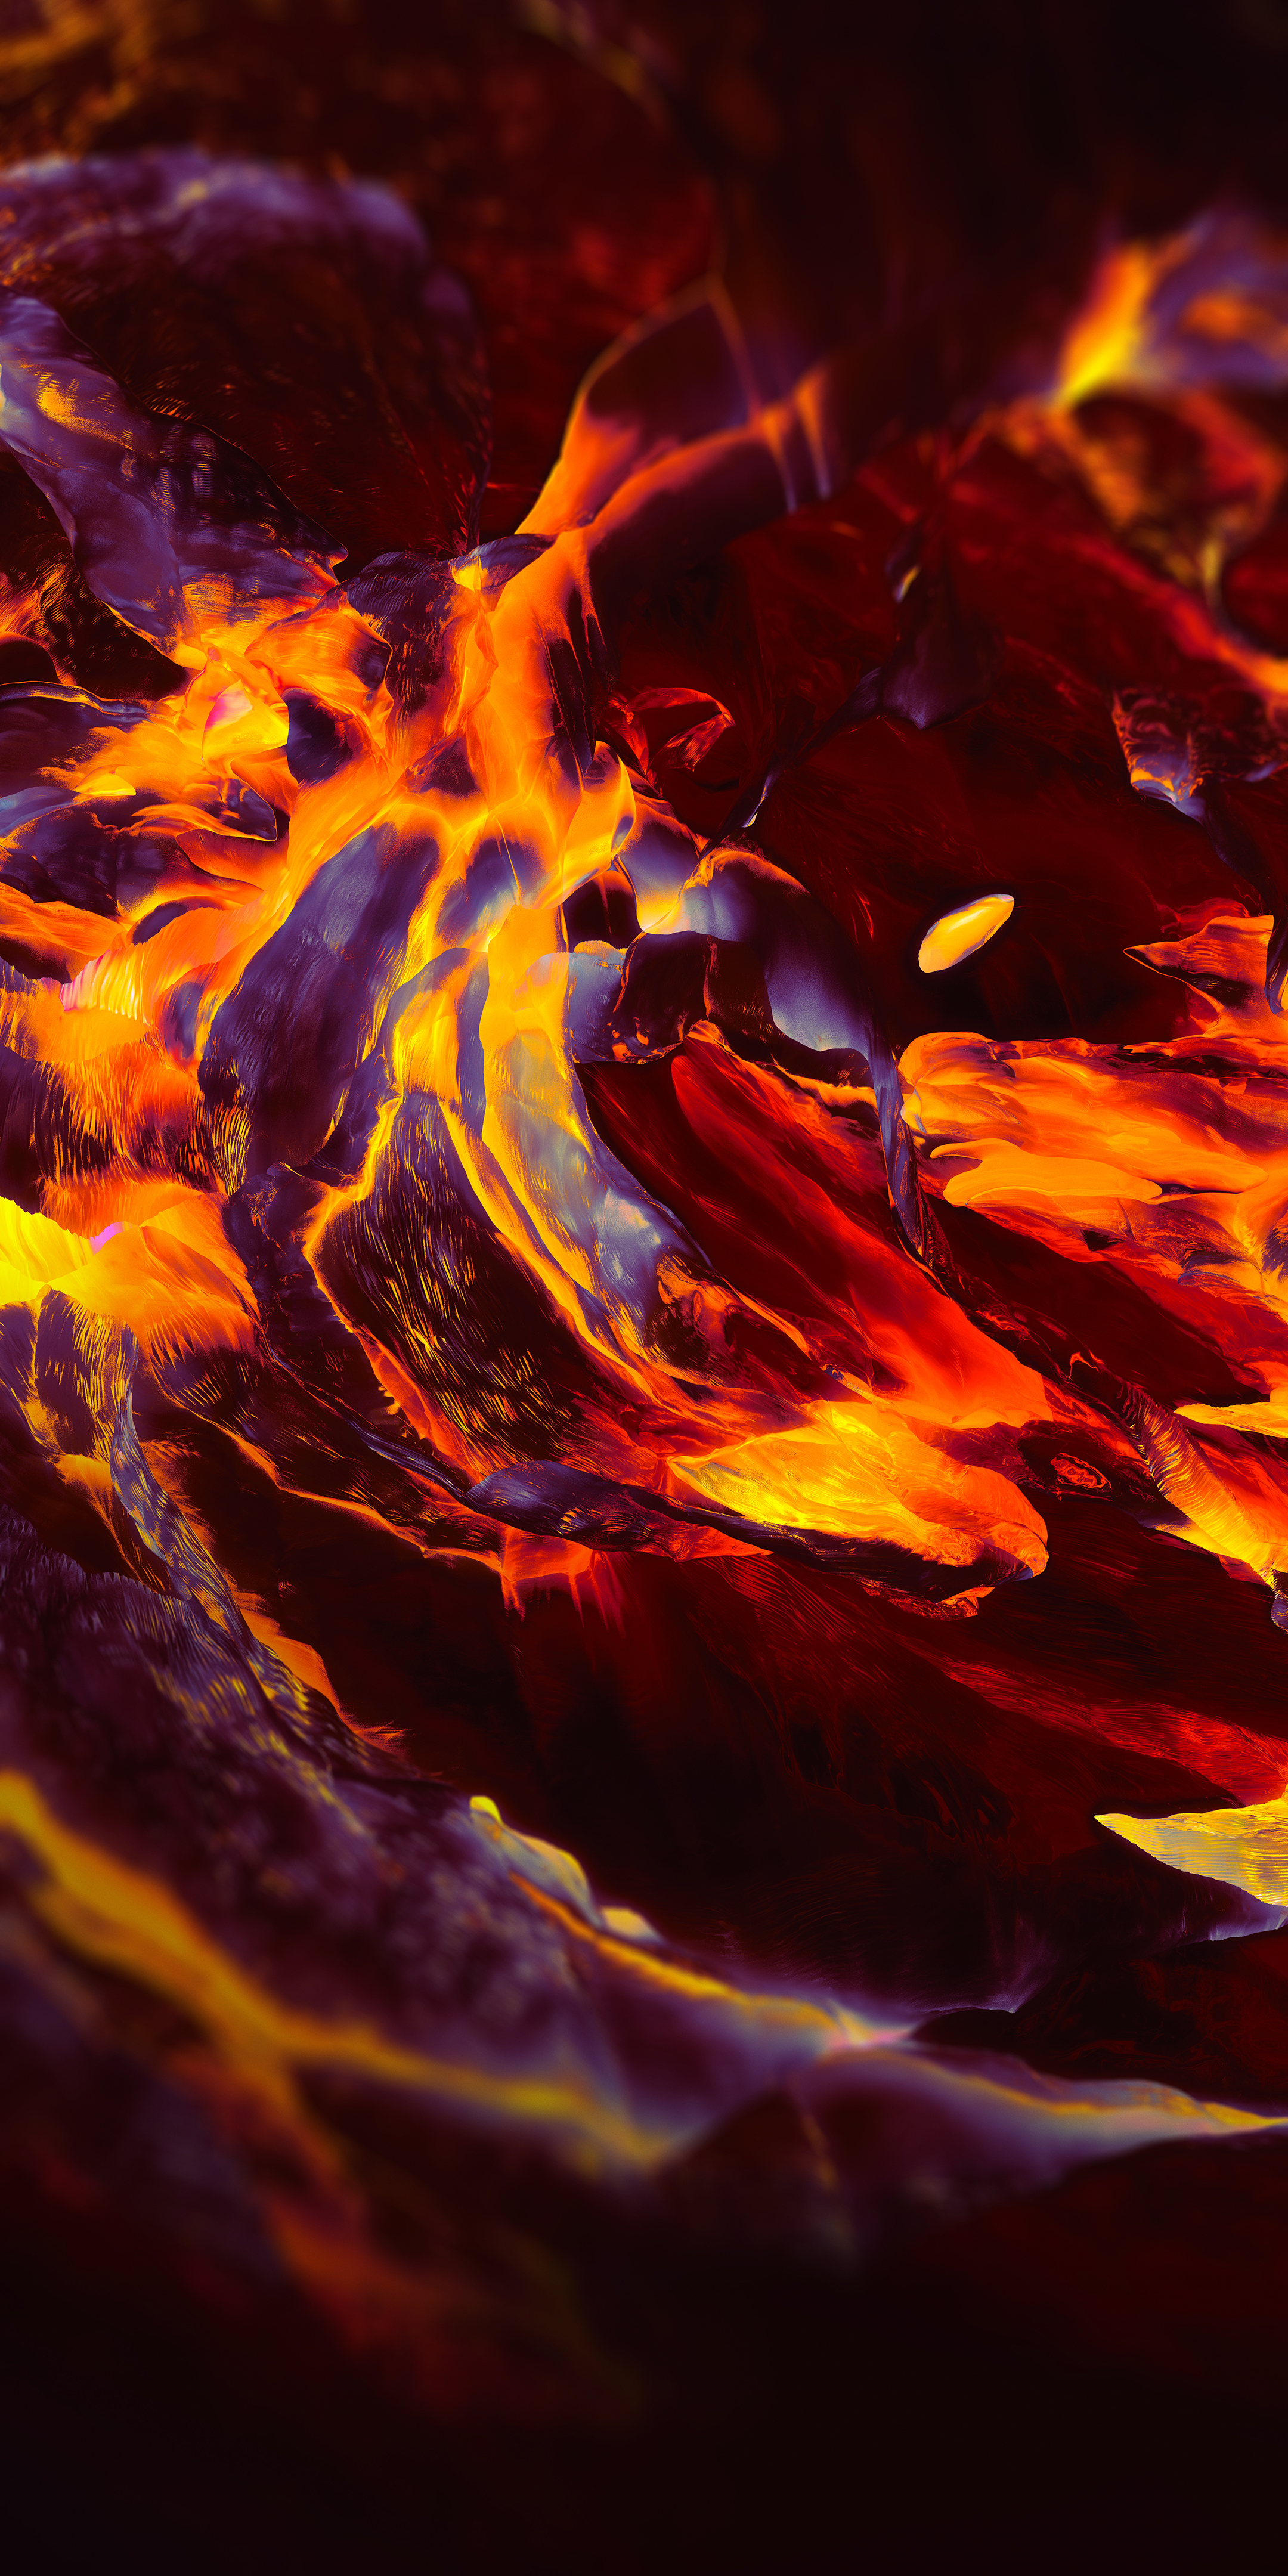 4k wallpapers for android,geological phenomenon,orange,purple,flame,heat